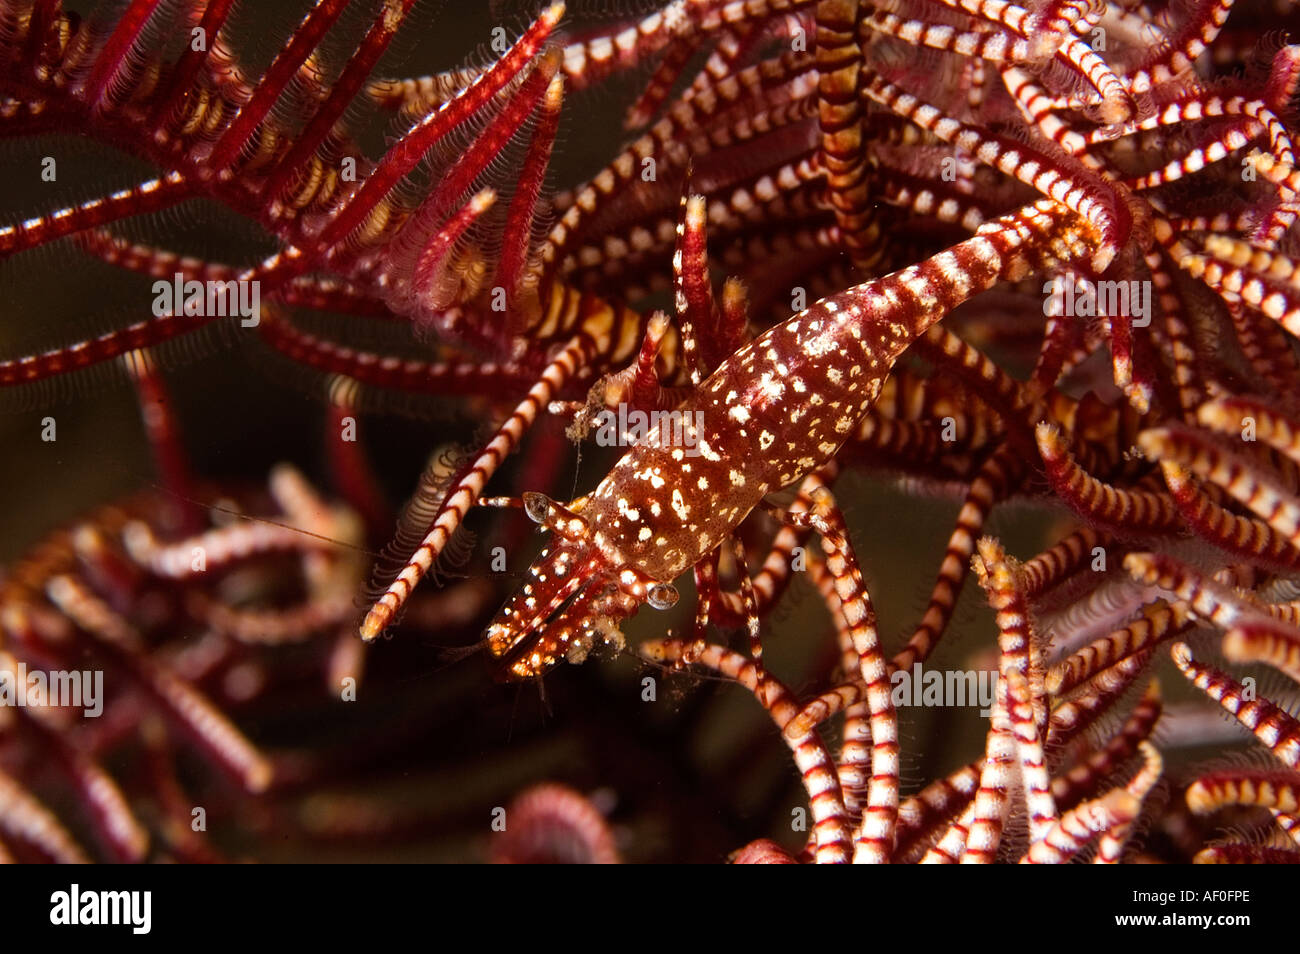 Commensal shrimp, Periclimenes commensalis, camouflaging on a feather star, Bali Indonesia. Stock Photo